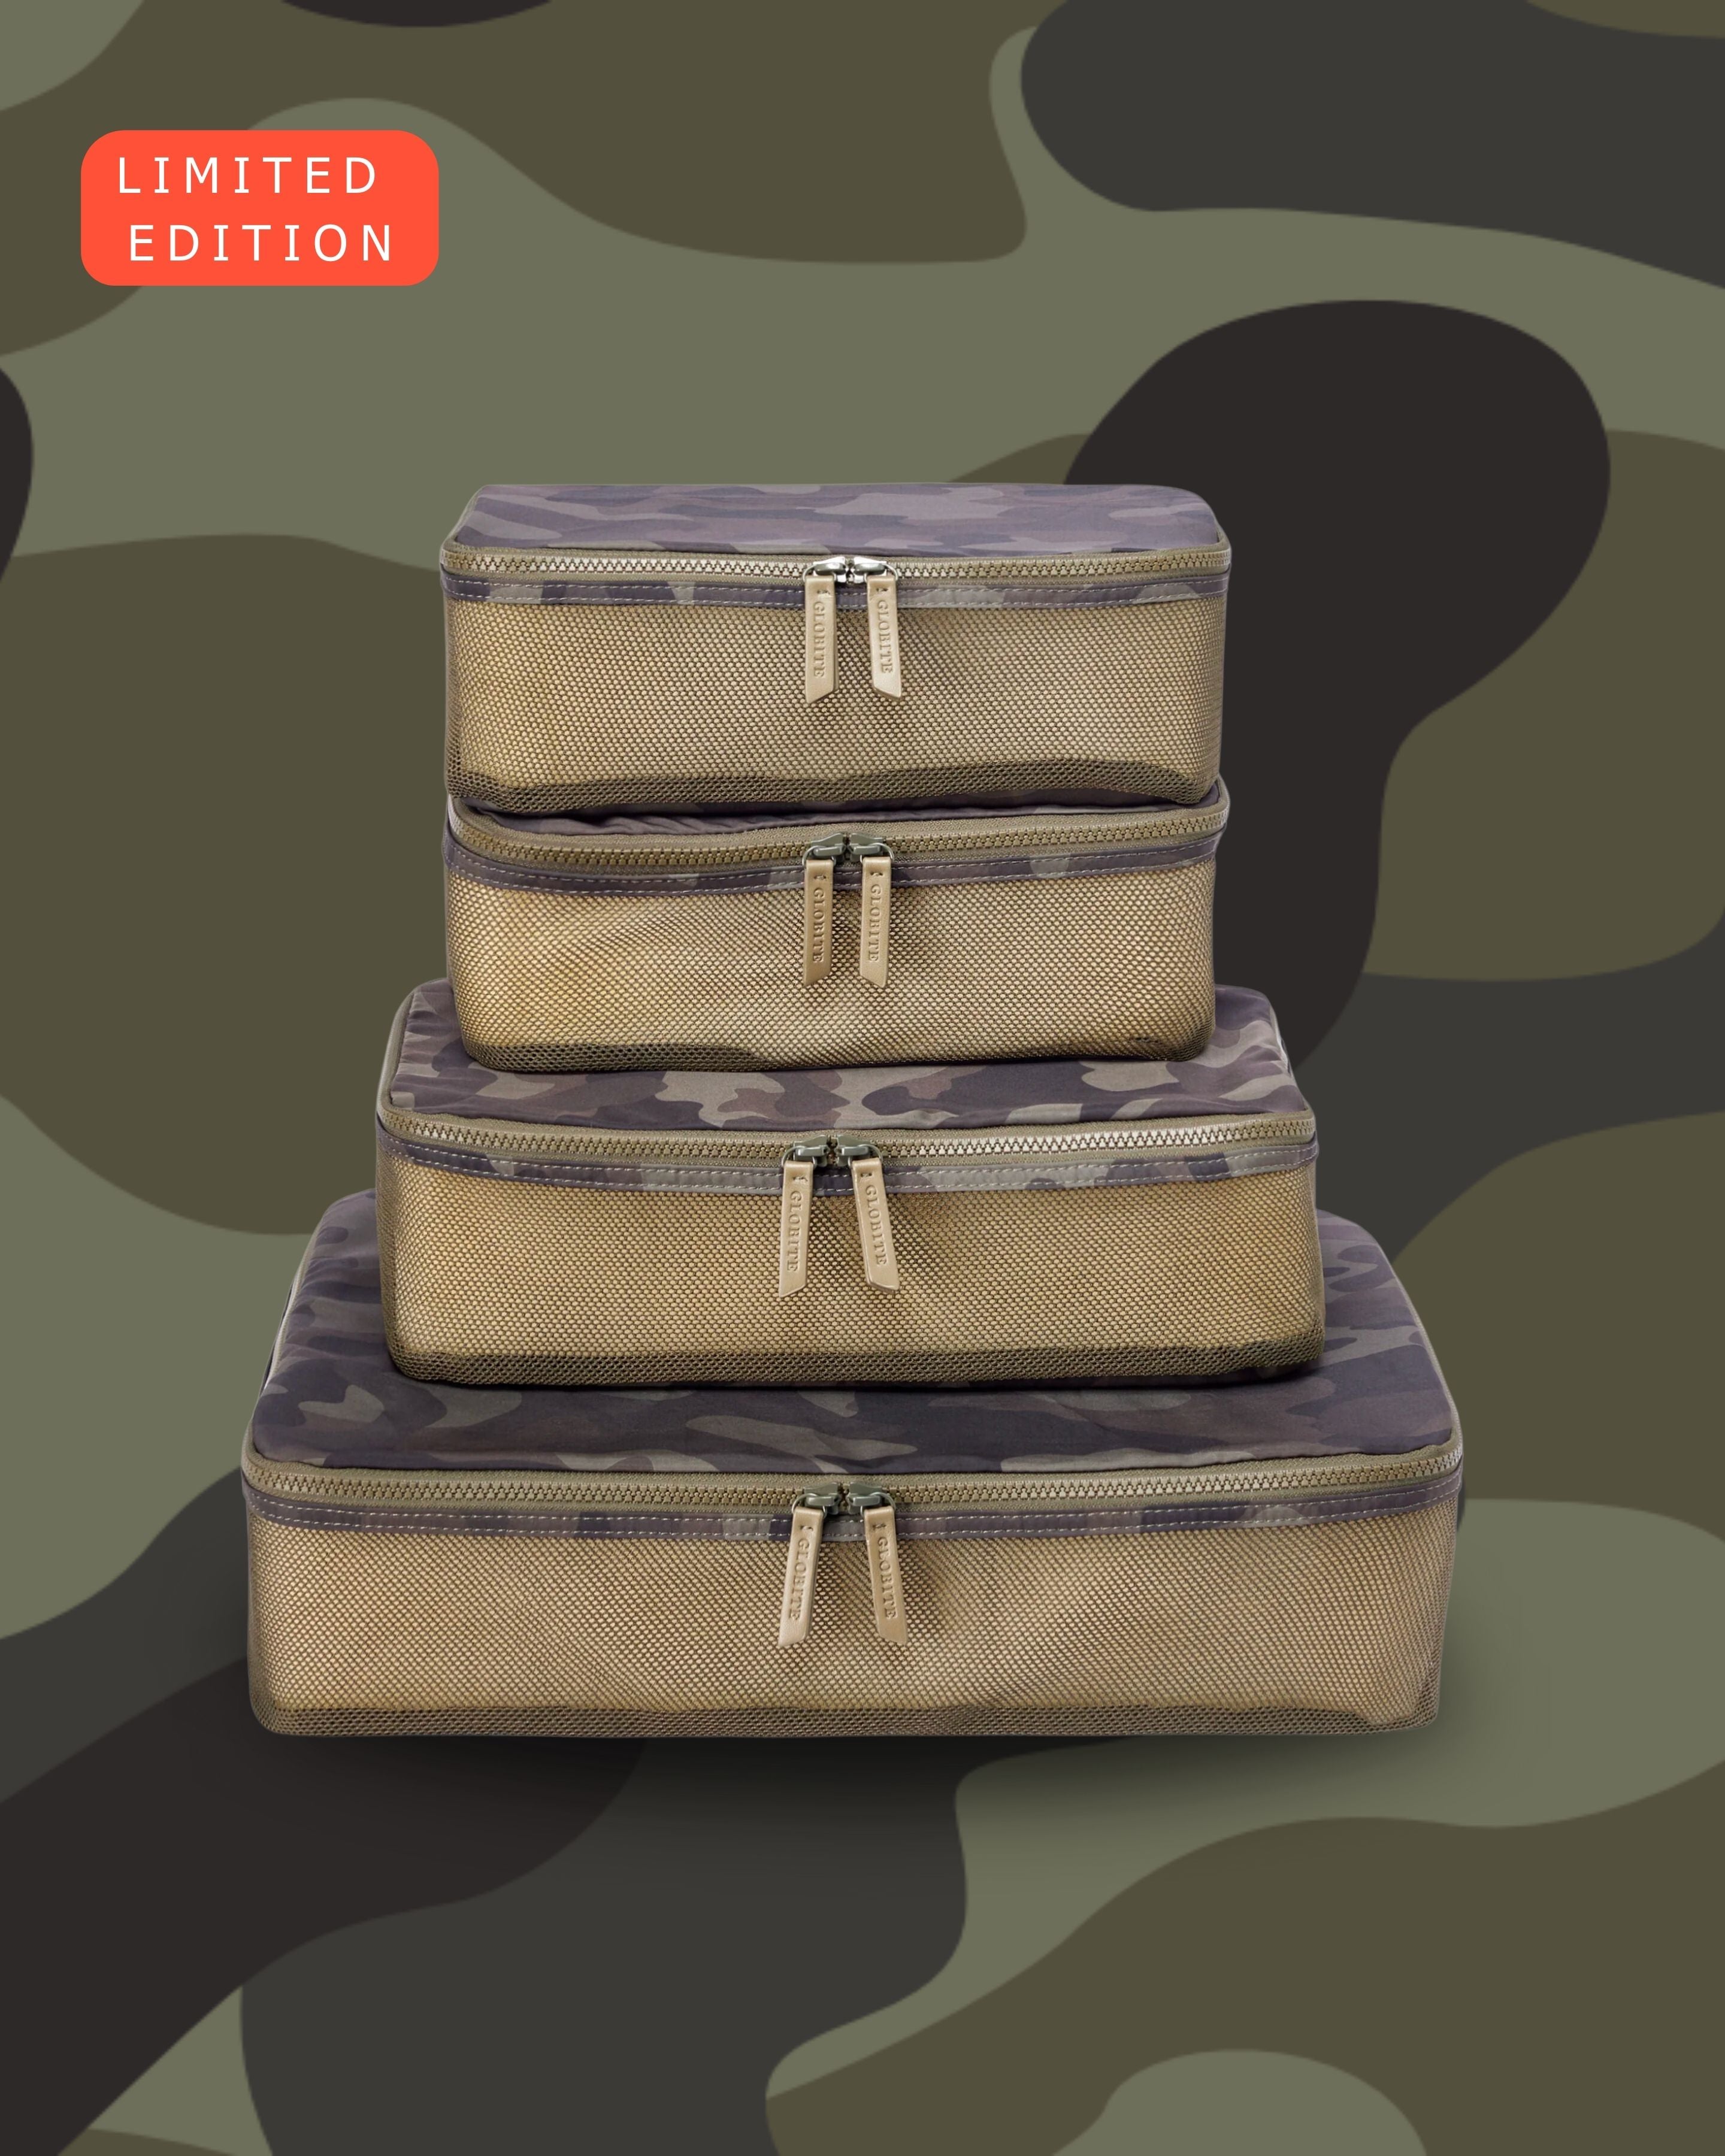 Foilage Green Camo Limited Edition 4 Piece Packing Cubes